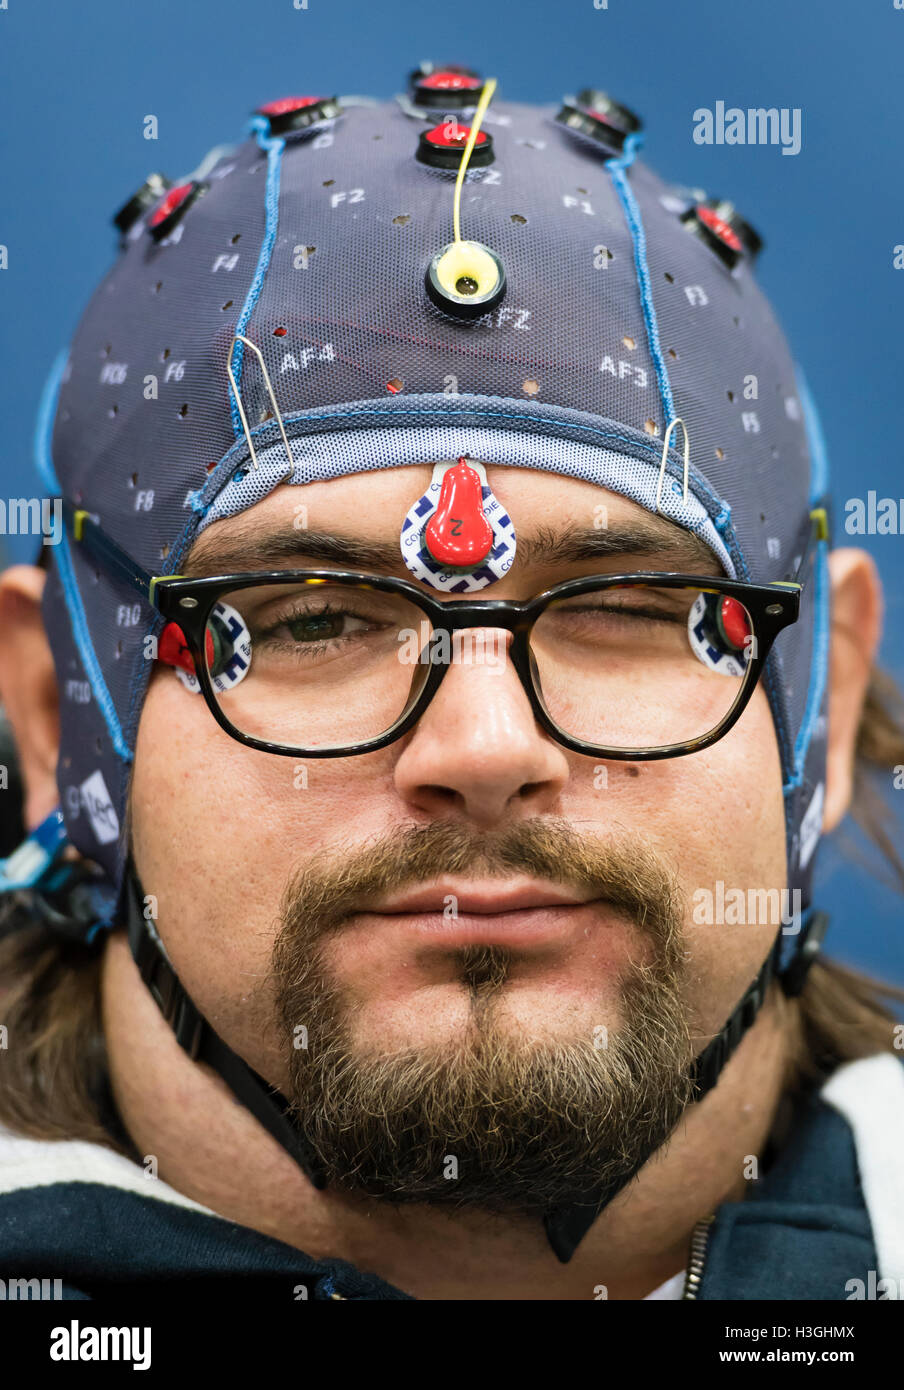 Kloten, Switzerland - 8 October 2016: Numa Poujouly is winking at the photographer before the BCI (Brain-Computer Interface) race at Cybathlon, the first championship for racing pilots with disabilities using bionic devices at the Swiss Arena in Kloten (Zurich), Switzerland. At the BCI race, the paraplegic BCI athlete is piloting an avatar through a computer game just with his thoughts. Later that day, Numa Poujouly finished first in the final and won the first Cybathlon BCI gold medal. Credit:  Erik Tham/Alamy Live News Stock Photo